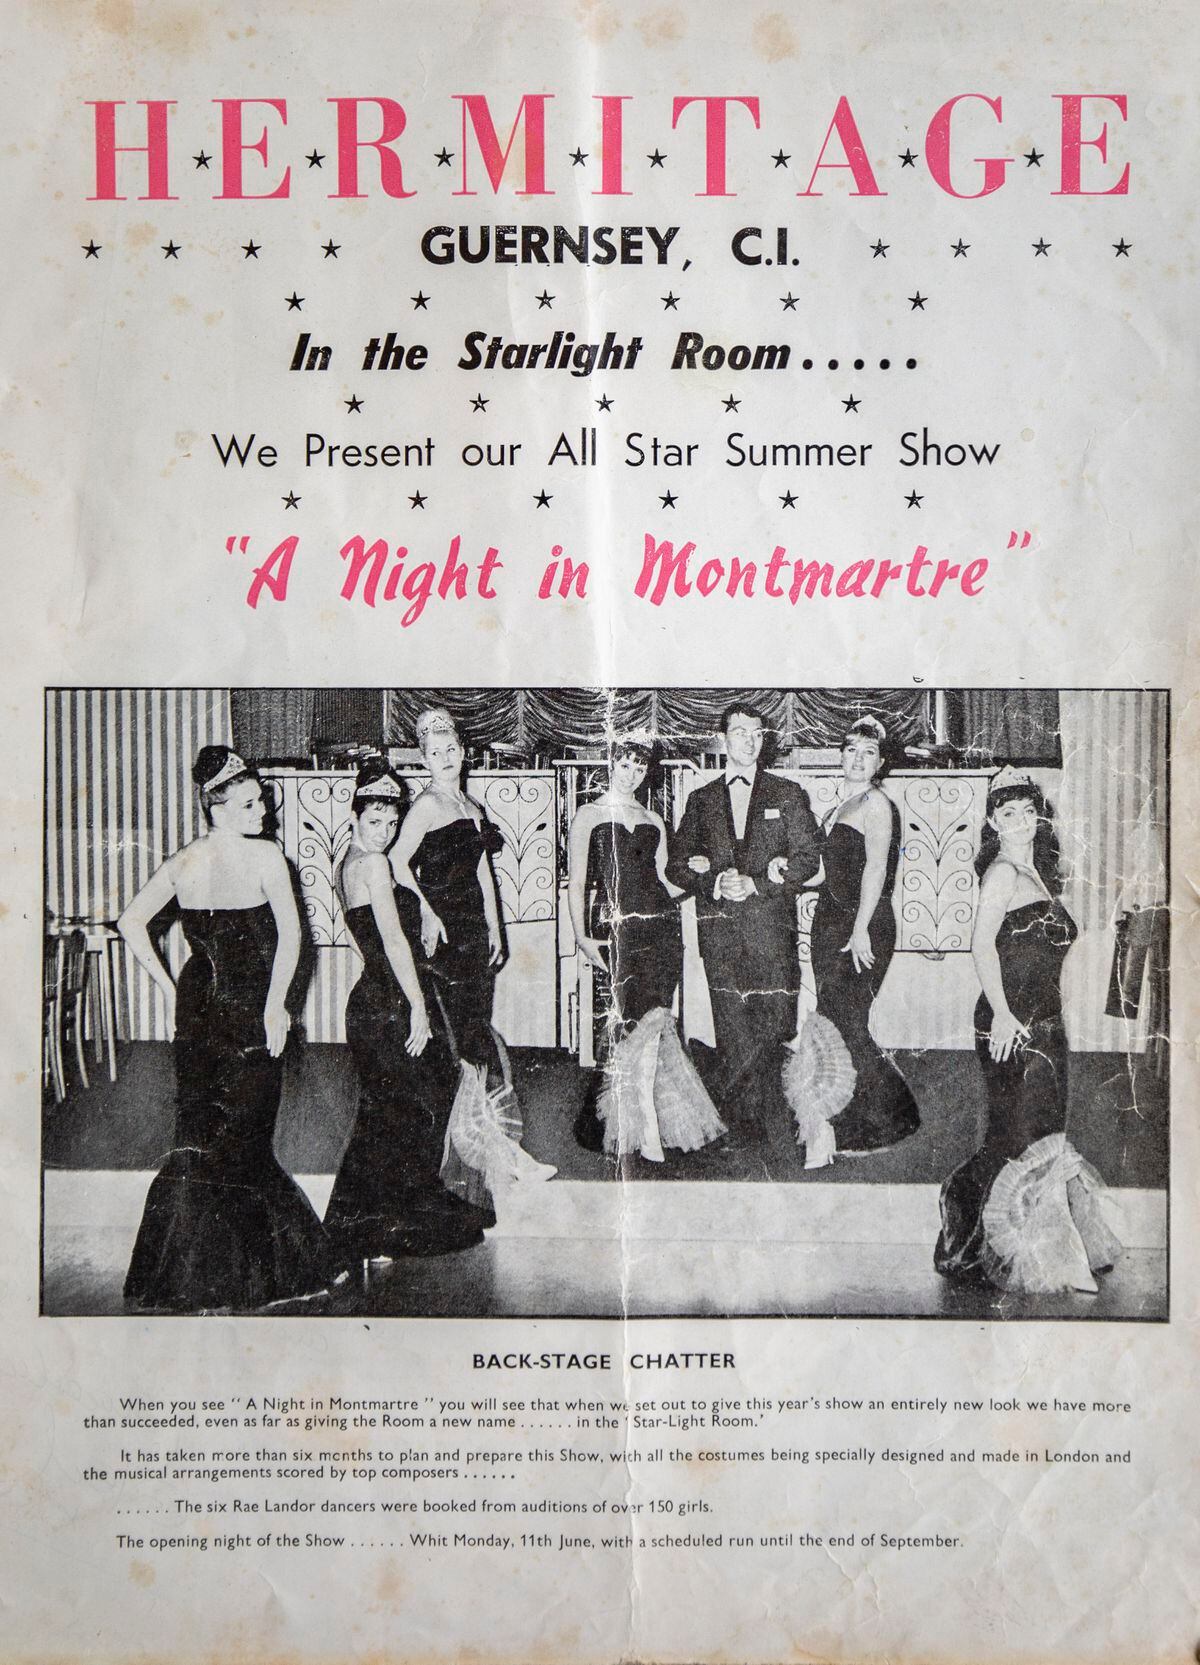 a poster advertising A Night In Montmartre at the Hermitage in 1962, a show put on by Ray Marks.